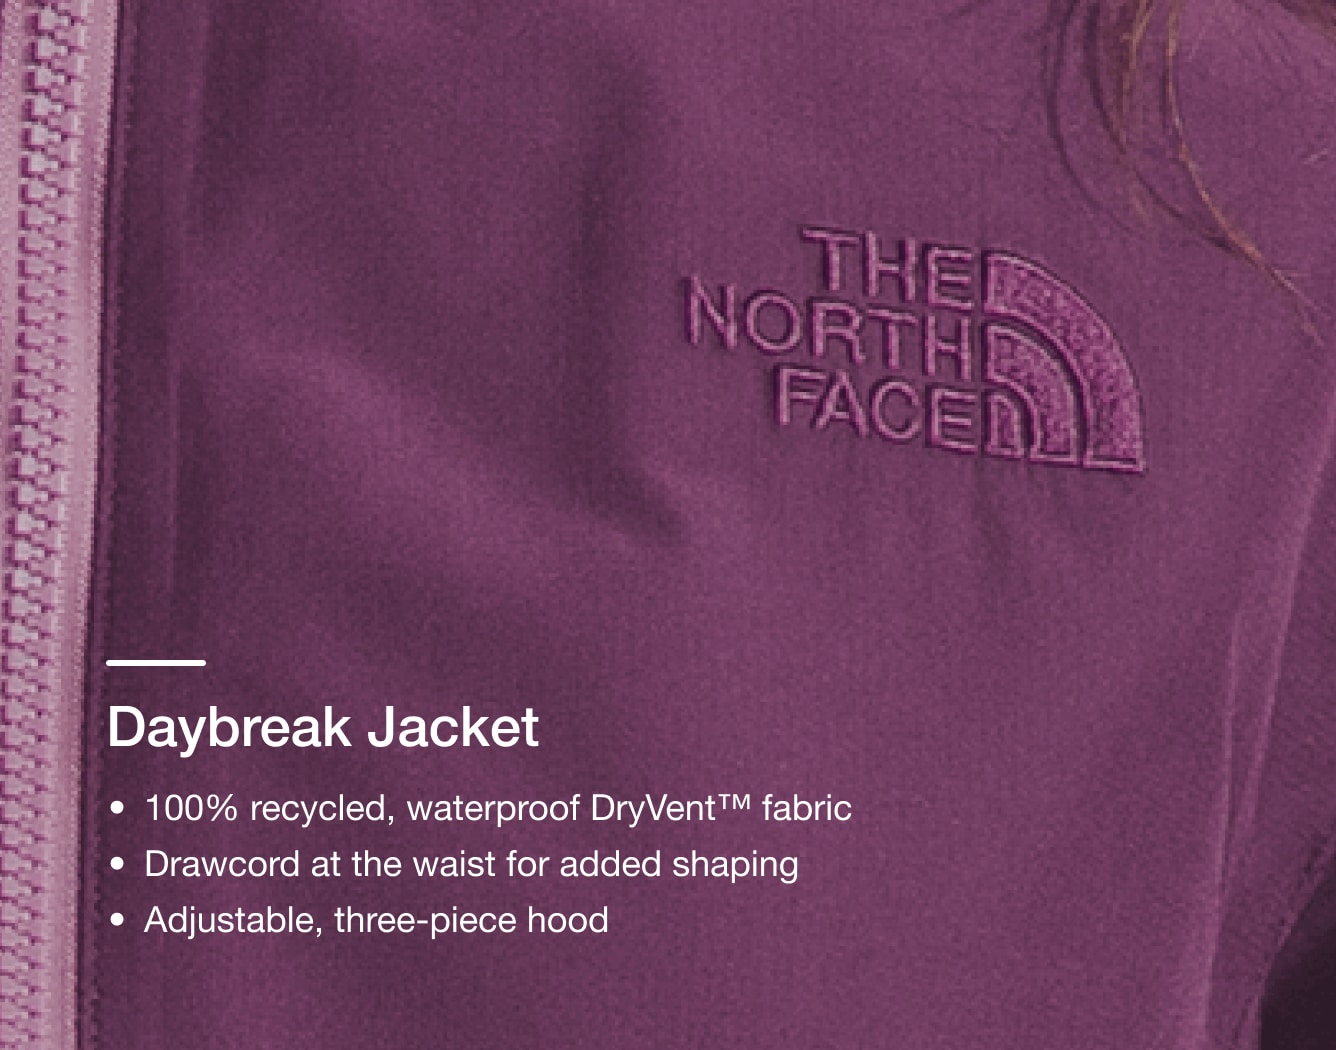 A close-up shot of the waterproof fabric used for the Daybreak Jacket.  